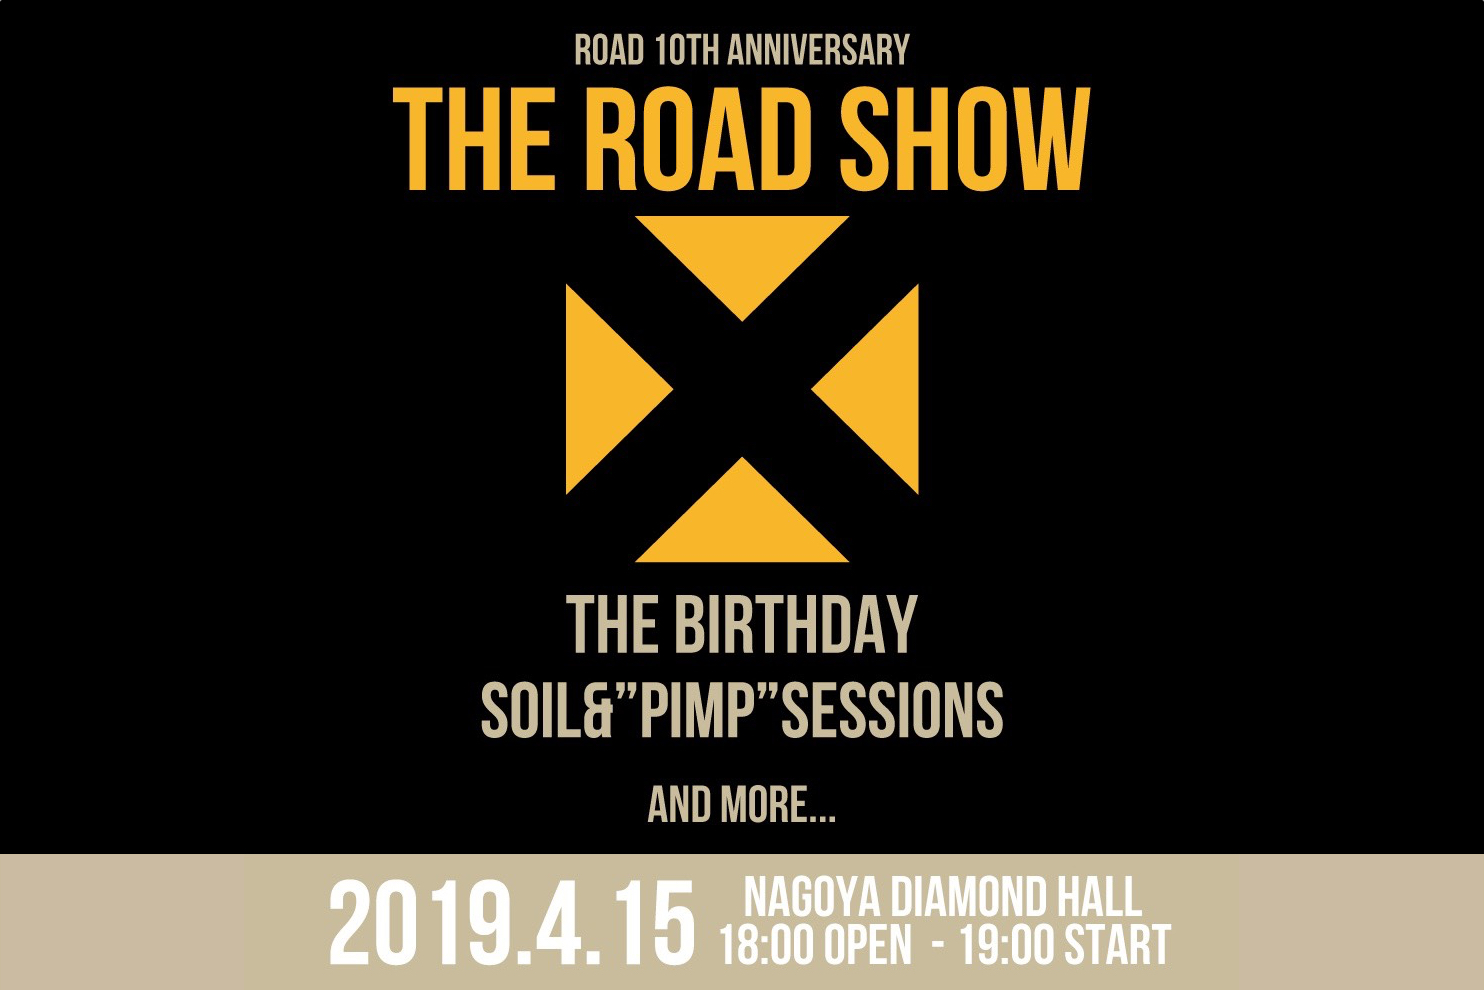 “THE ROAD SHOW”